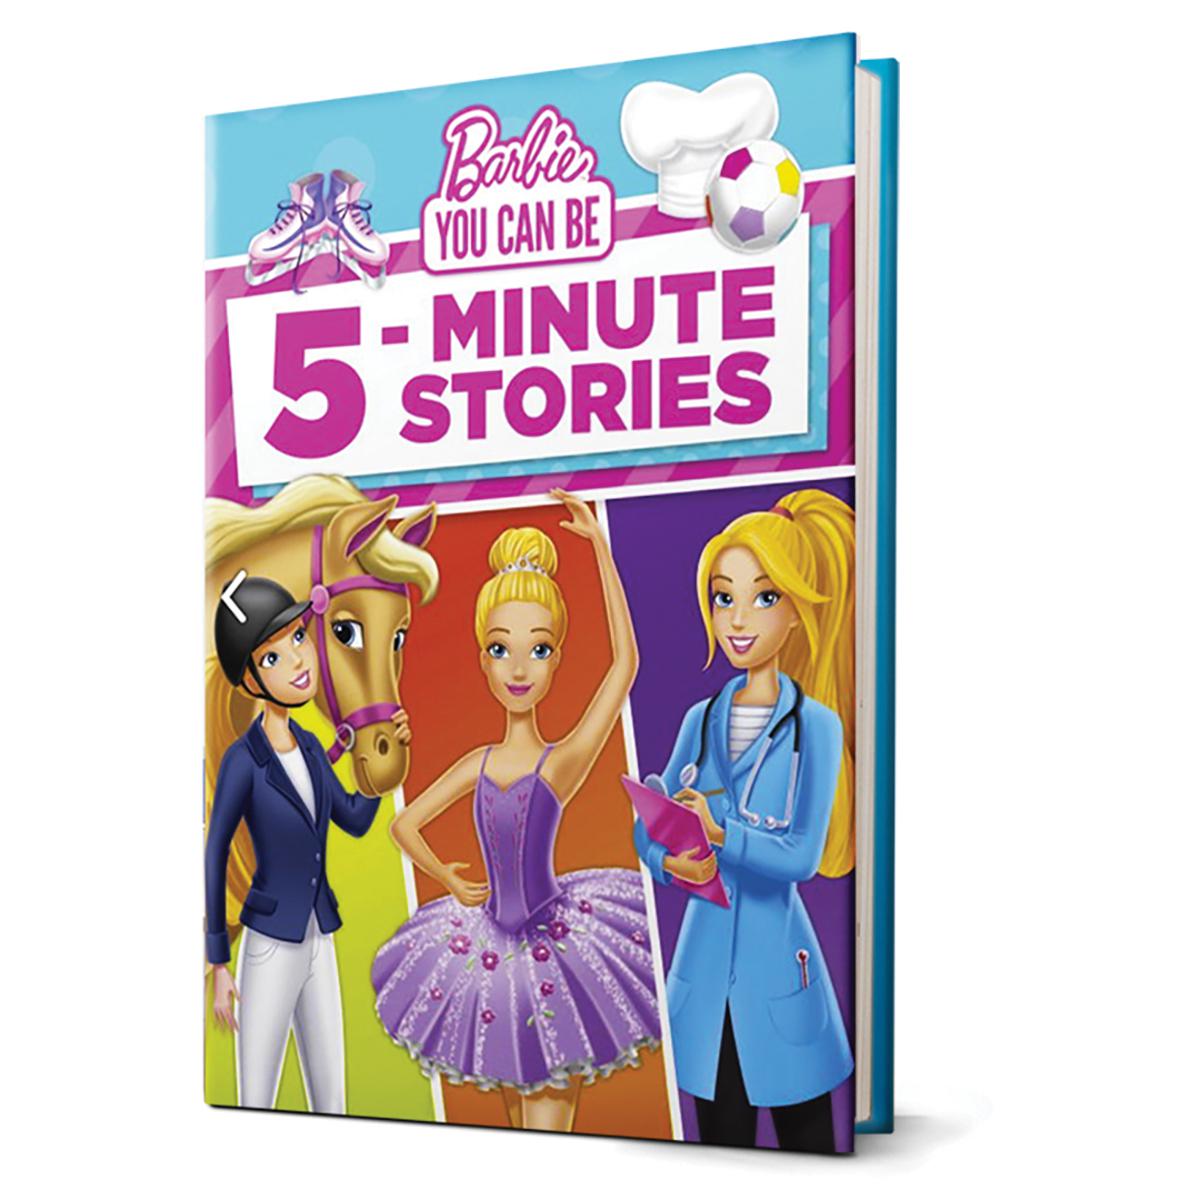  Barbie You Can Be: 5-Minute Stories 